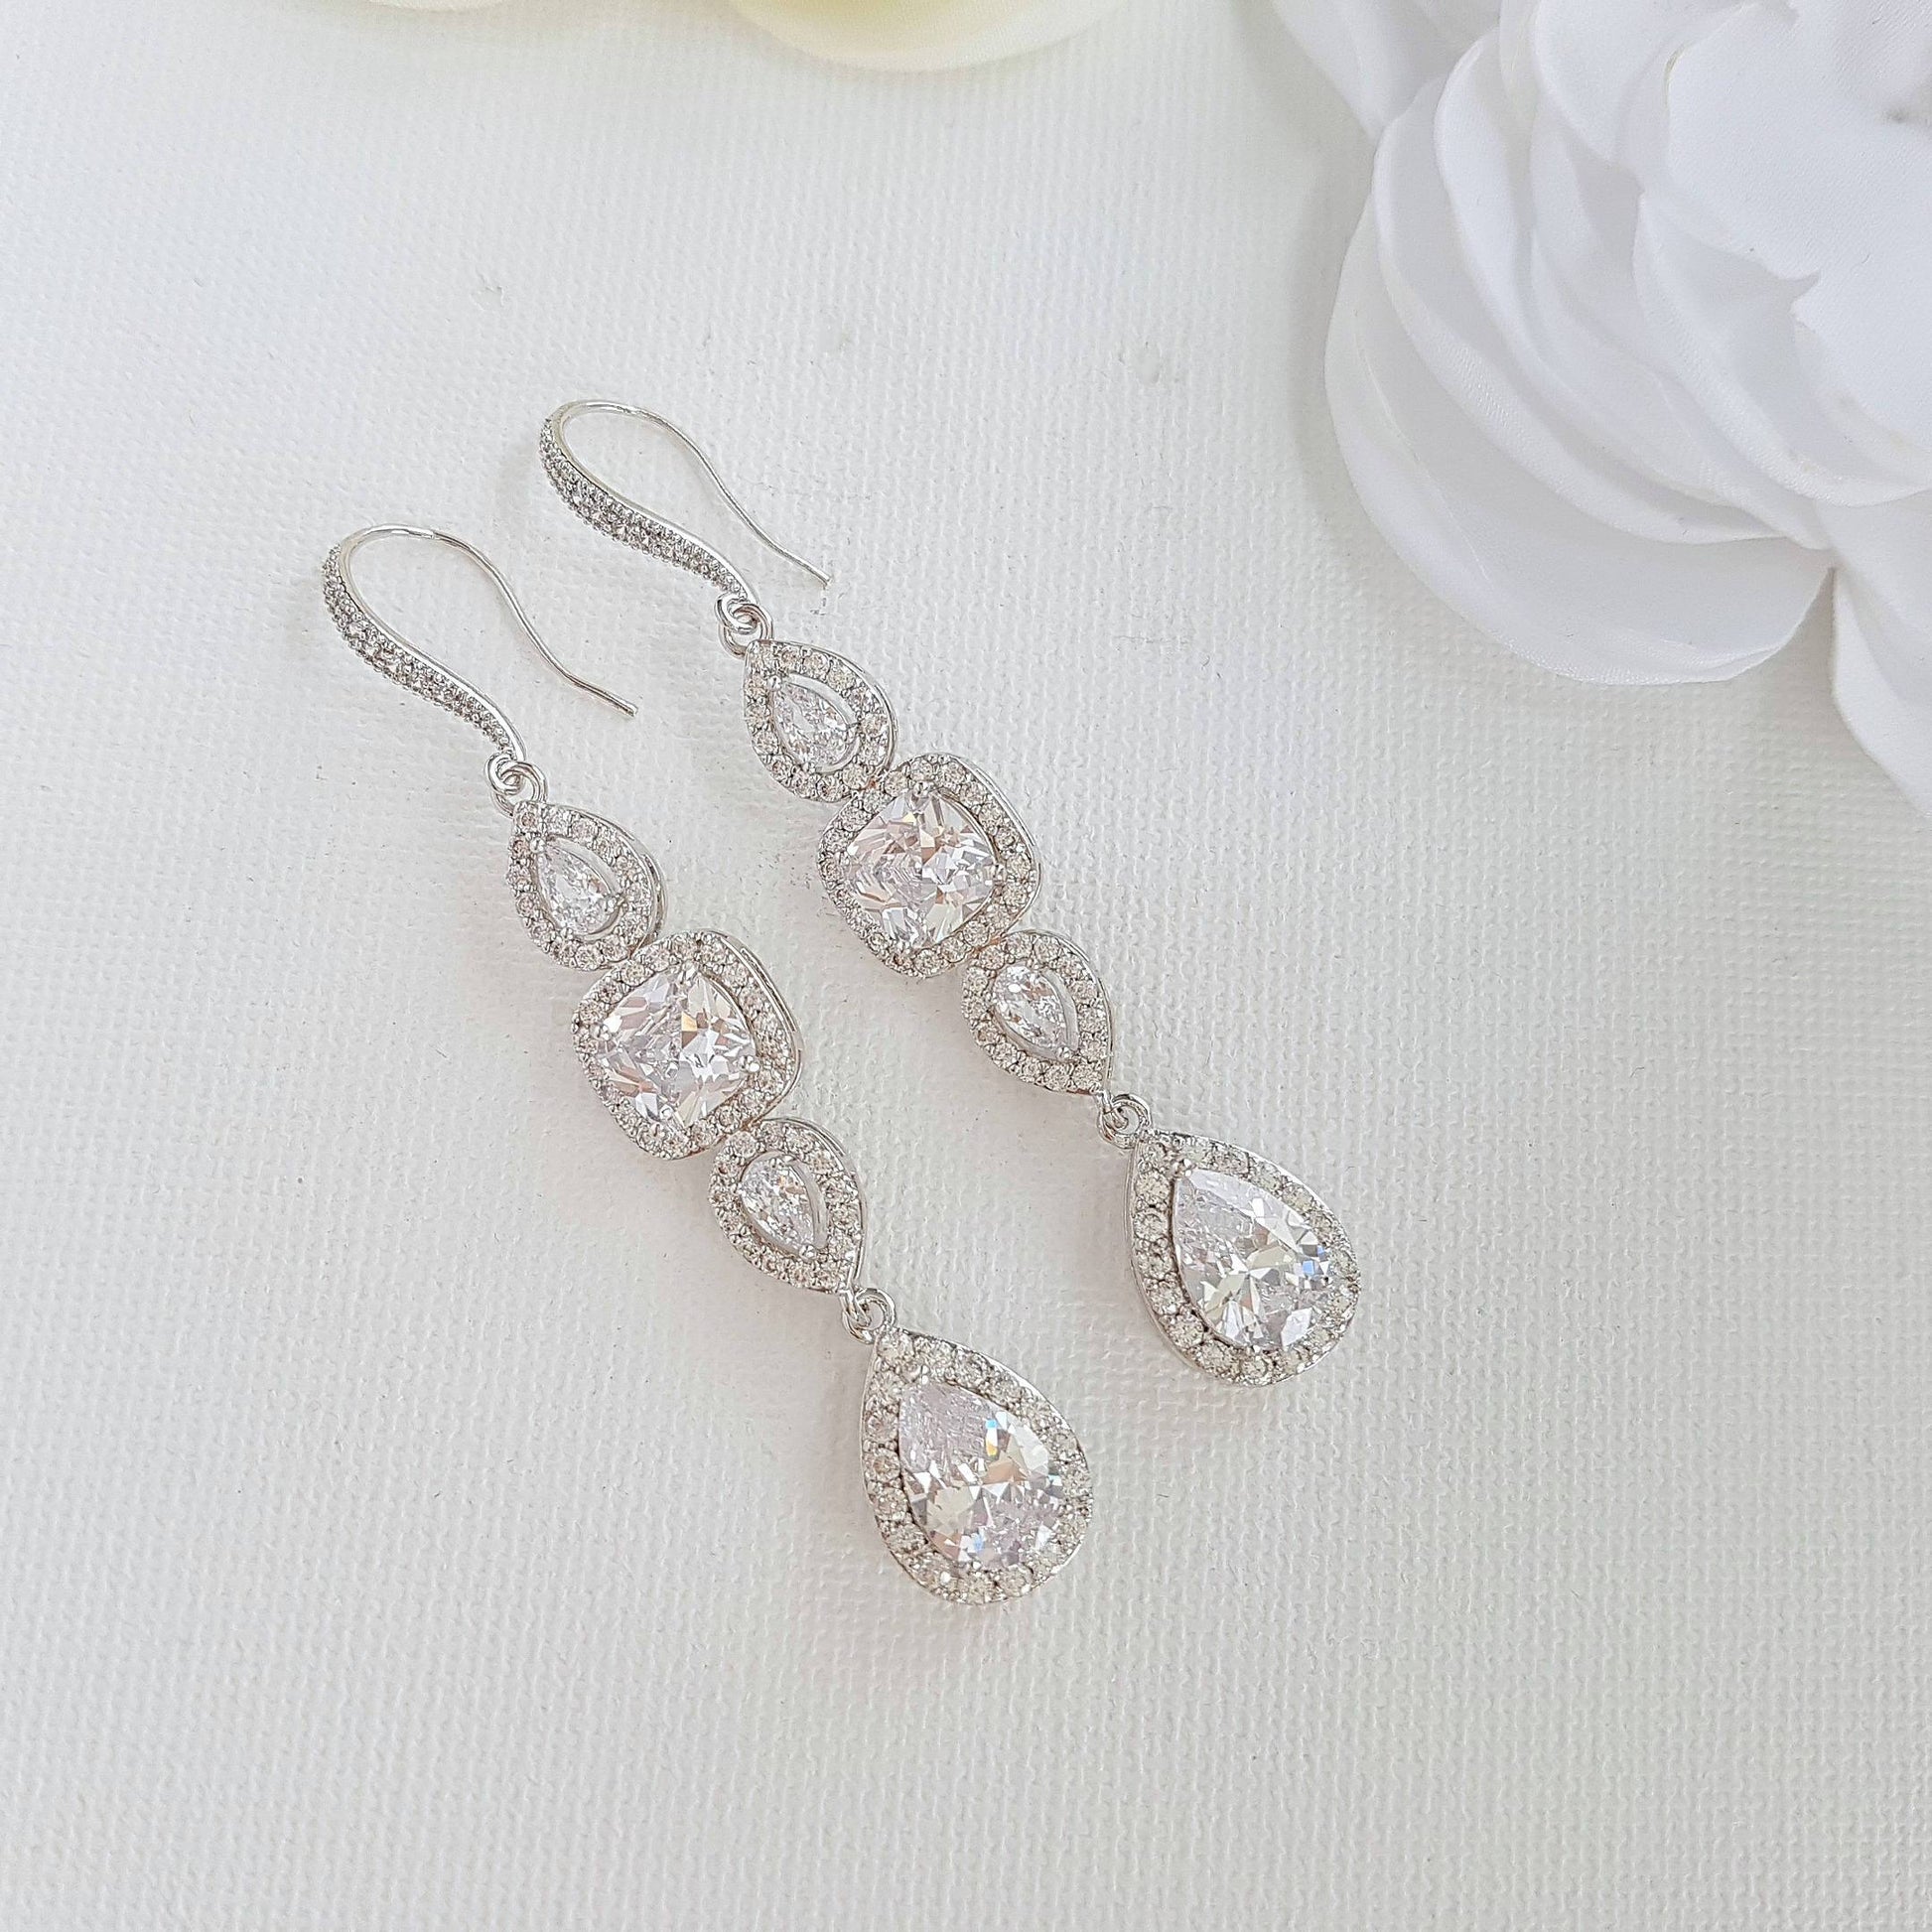 Long Silver Bride Earrings for Wedding Day, Drop Wedding Earrings with Teardrop and Round Cubic Zirconia, Bridal Jewelry, Reagan